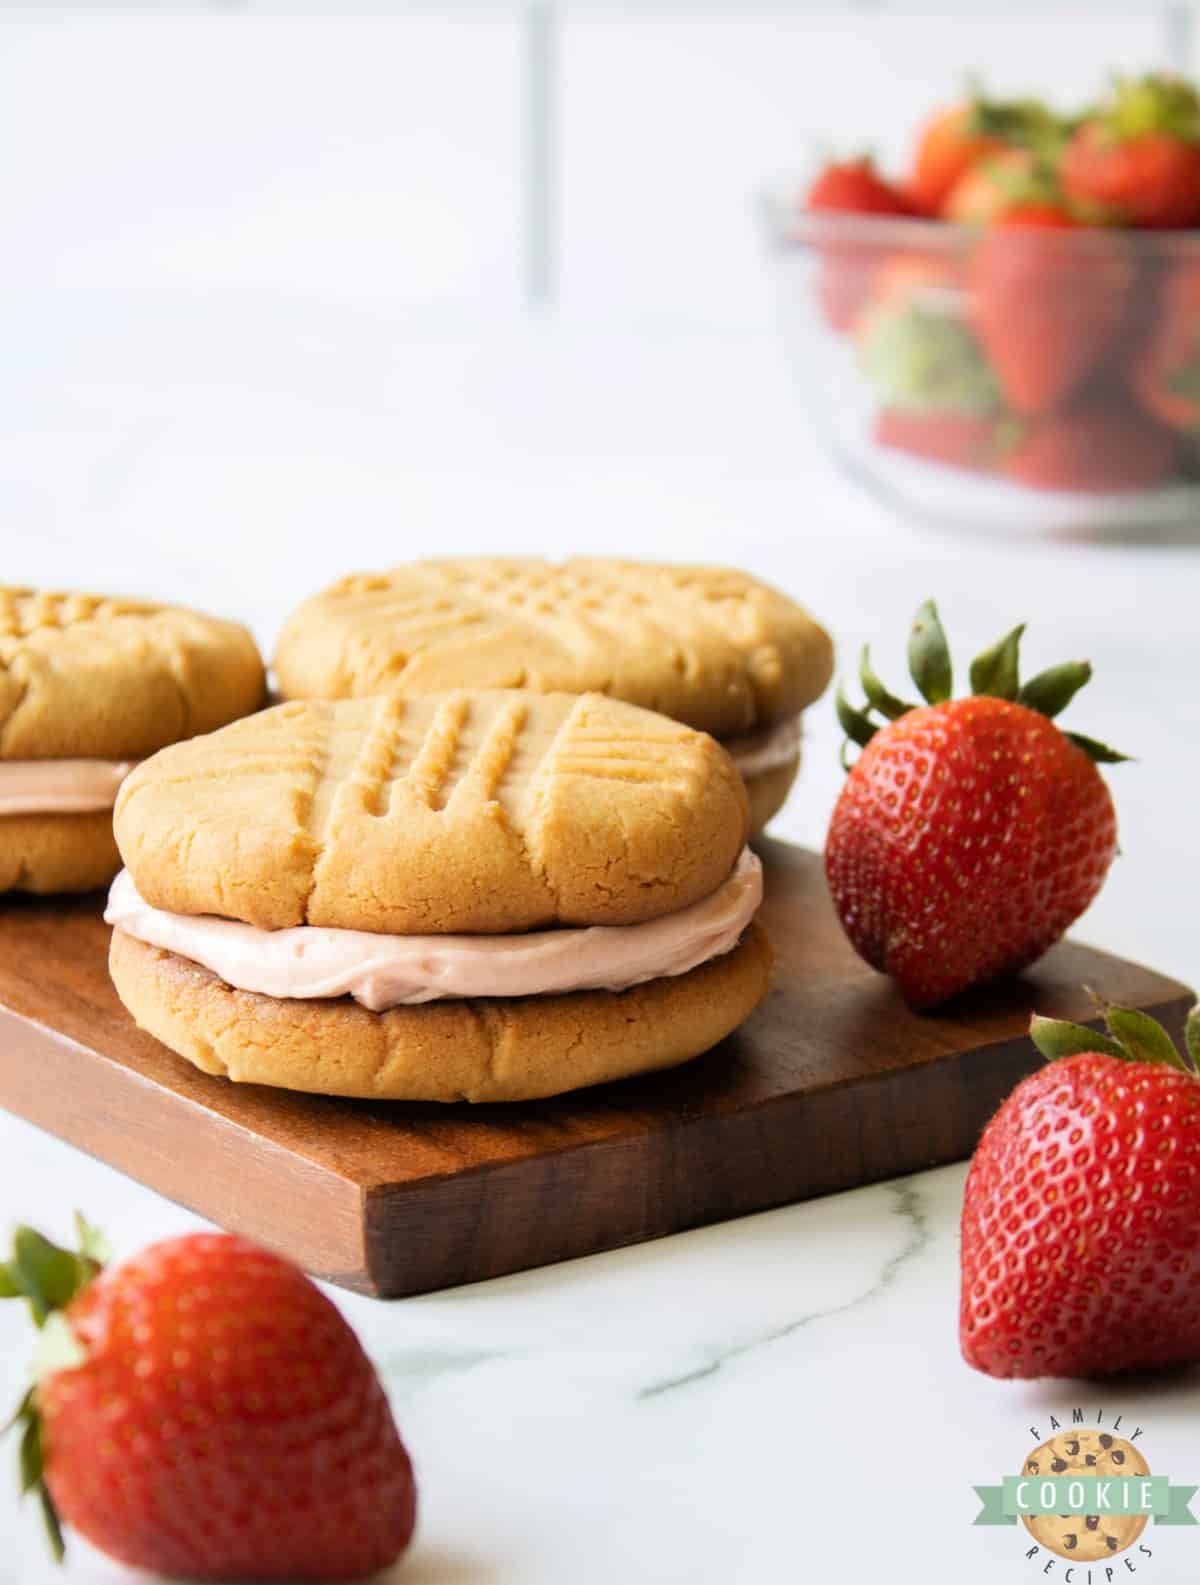 Peanut butter cookie sandwich with strawberry buttercream in the middle